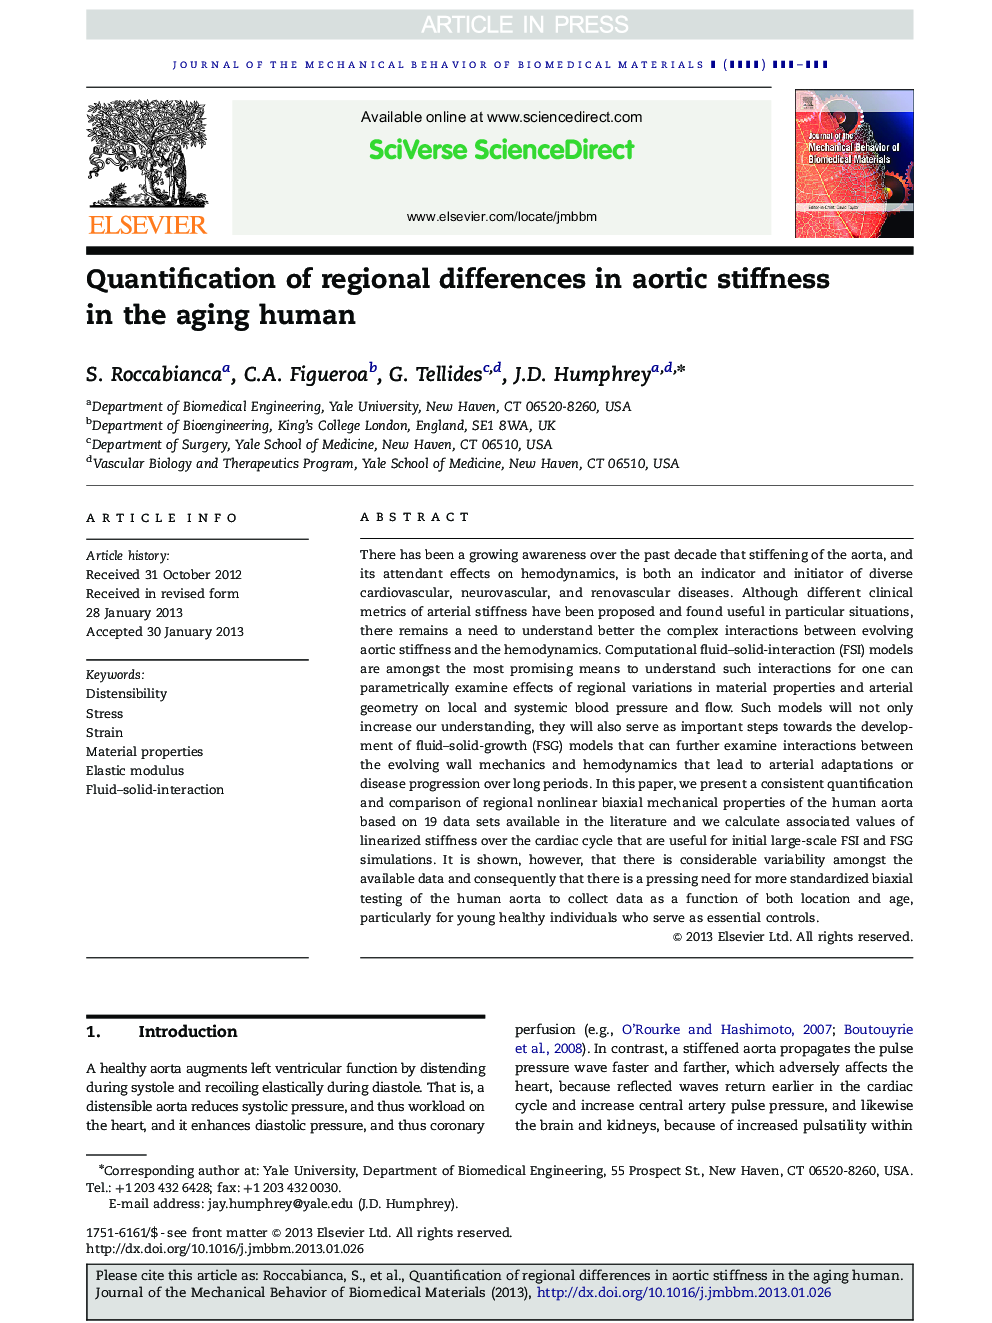 Quantification of regional differences in aortic stiffness in the aging human